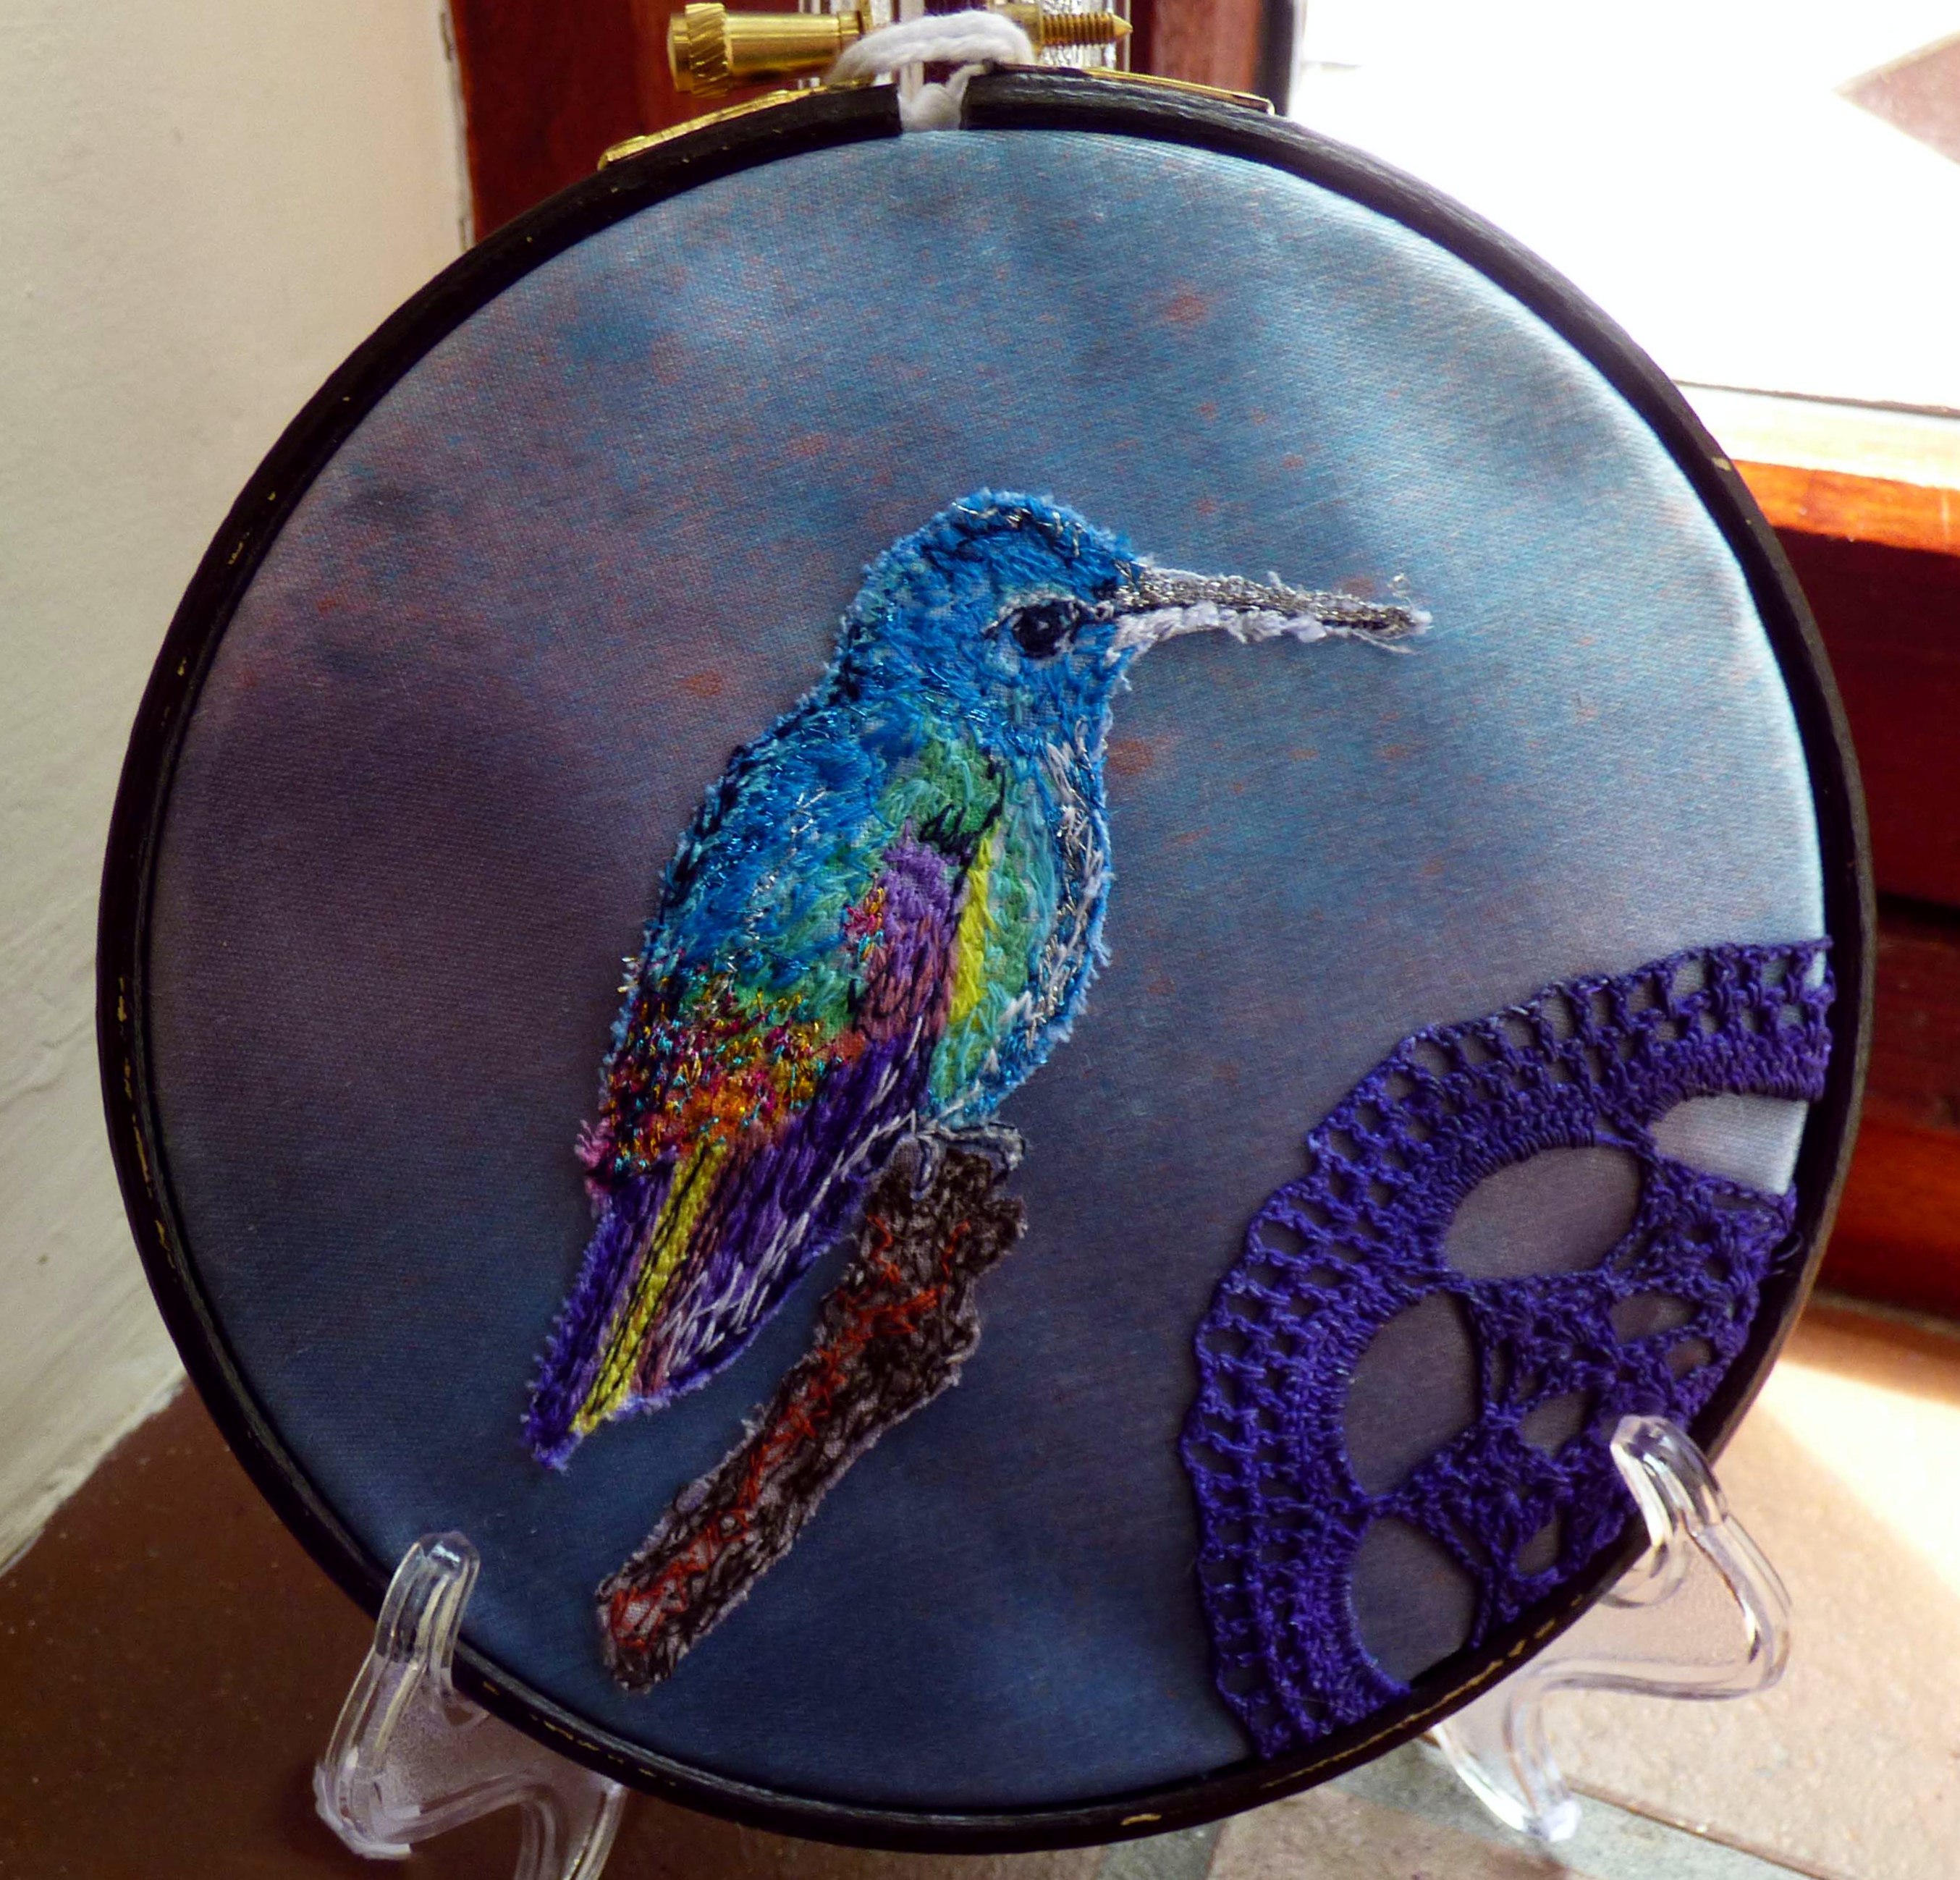 HUMMINGBIRD 3 by Susan Fielding, Natural Progression Group, July 2021